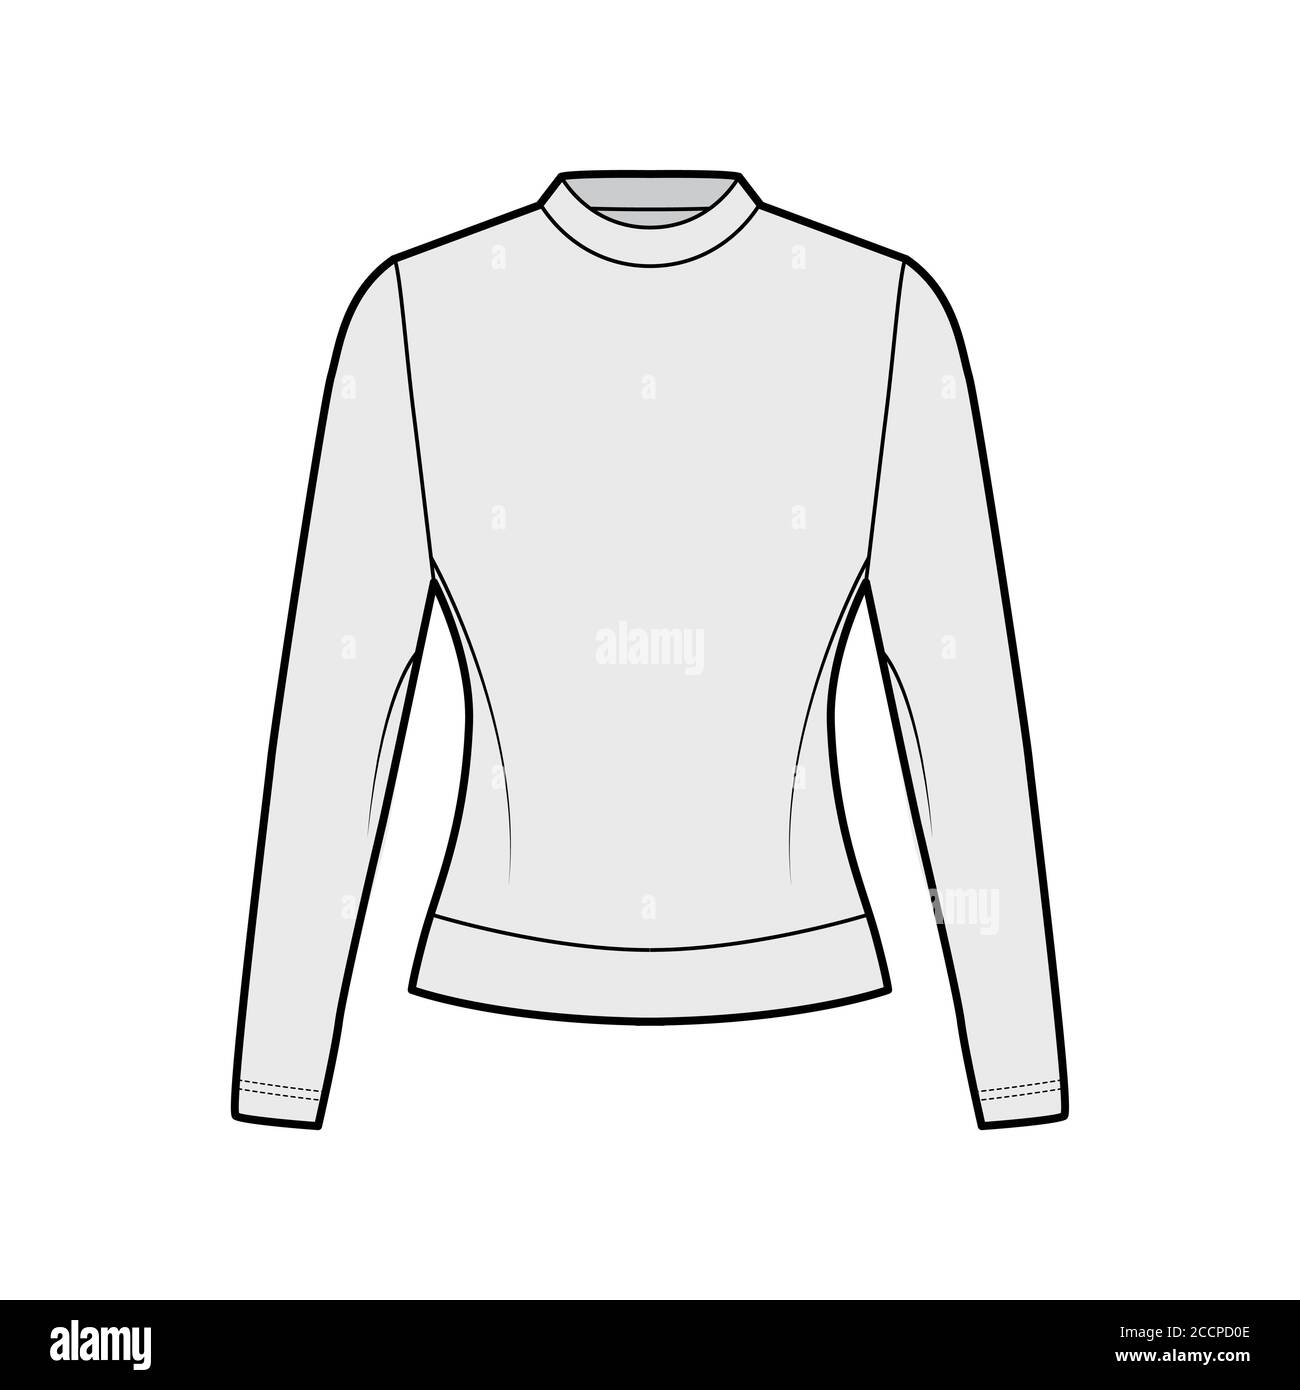 Cotton-terry sweatshirt technical fashion illustration with fitted body, crew neckline, long sleeves. Flat jumper apparel outwear template front,, grey color. Women, men, unisex top CAD mockup Stock Vector